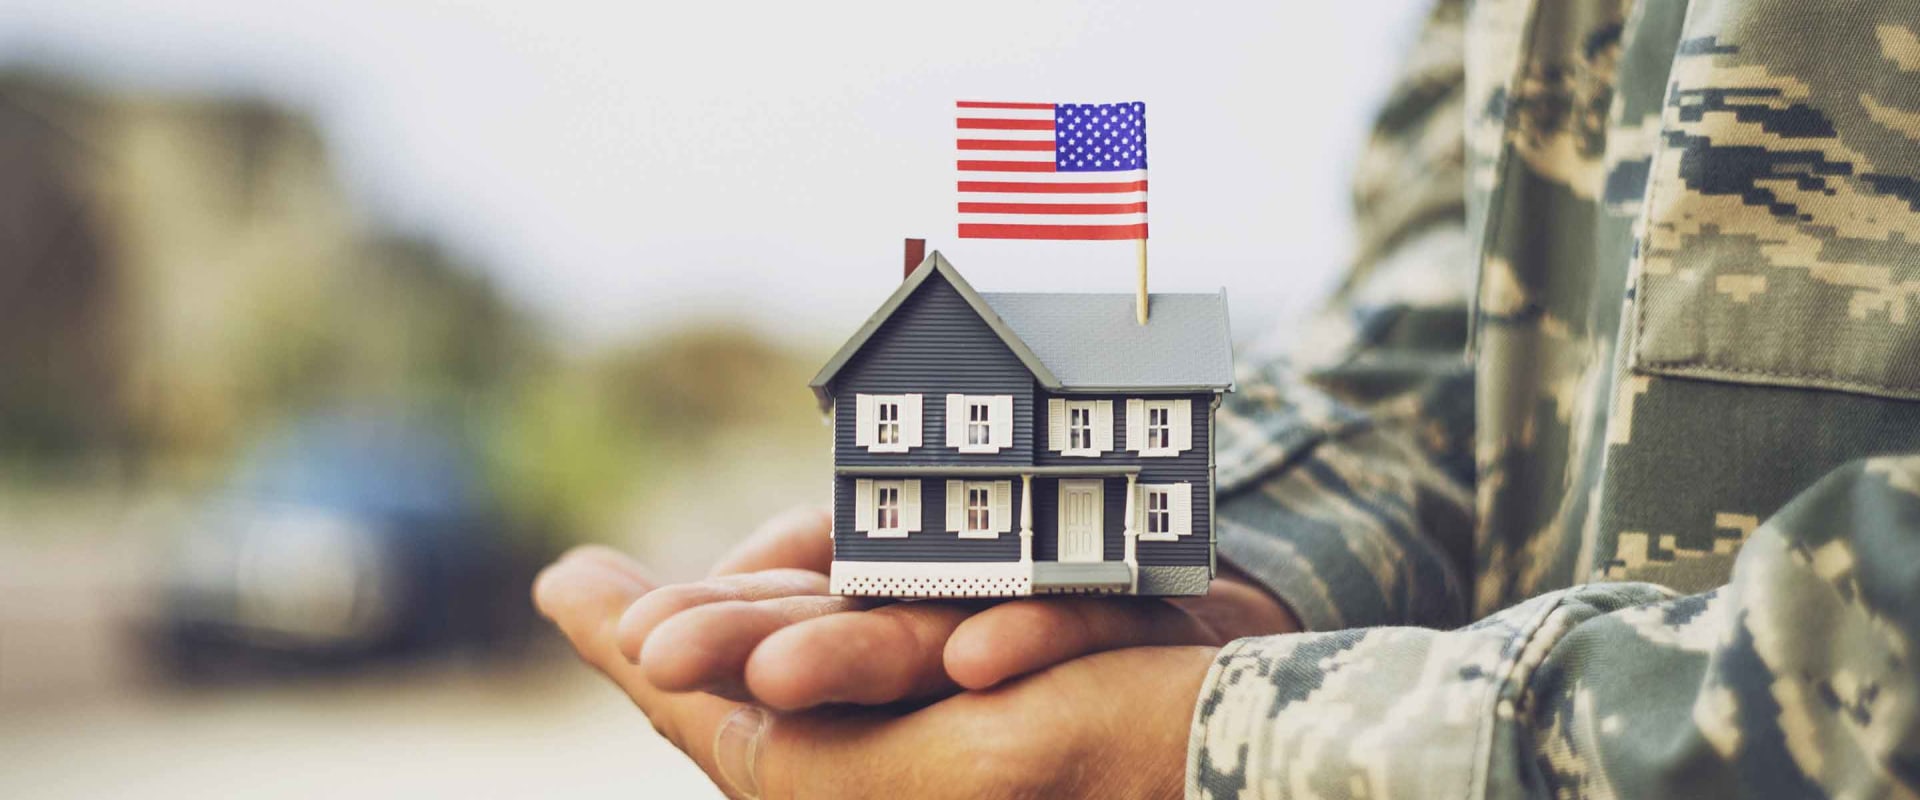 What is the rate for a va loan right now?